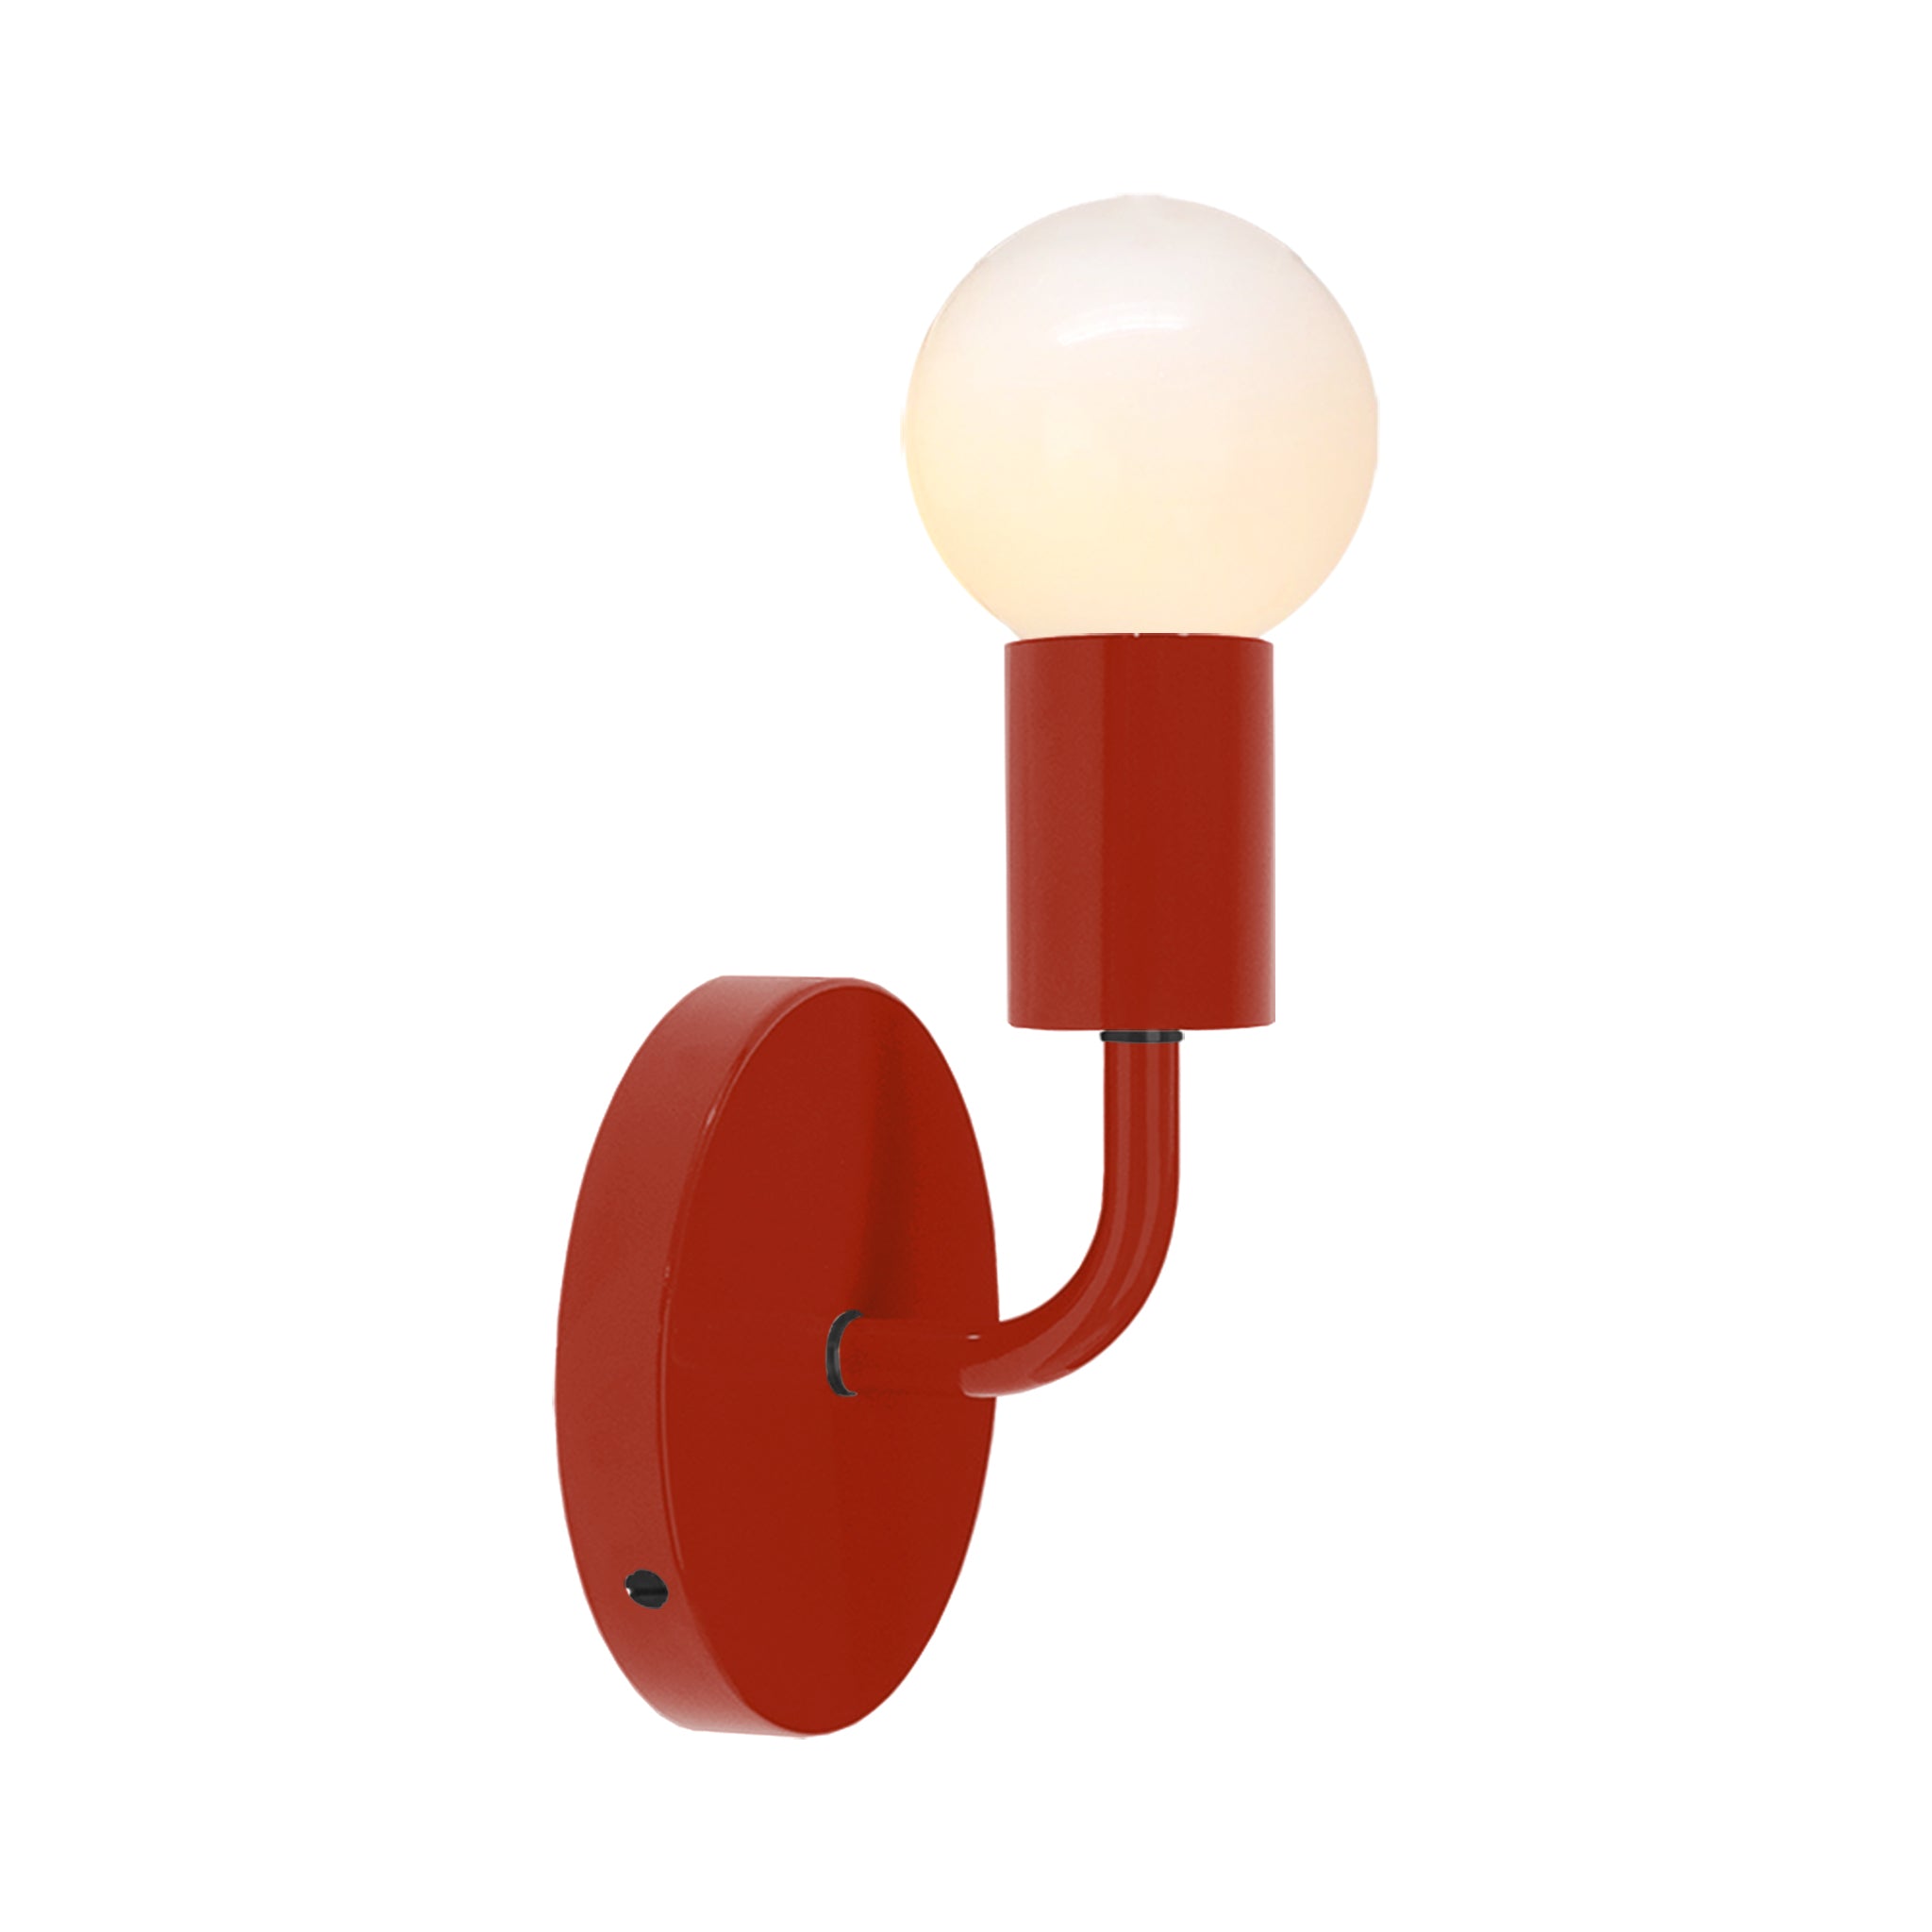 Black and riding hood red color Snug sconce Dutton Brown lighting